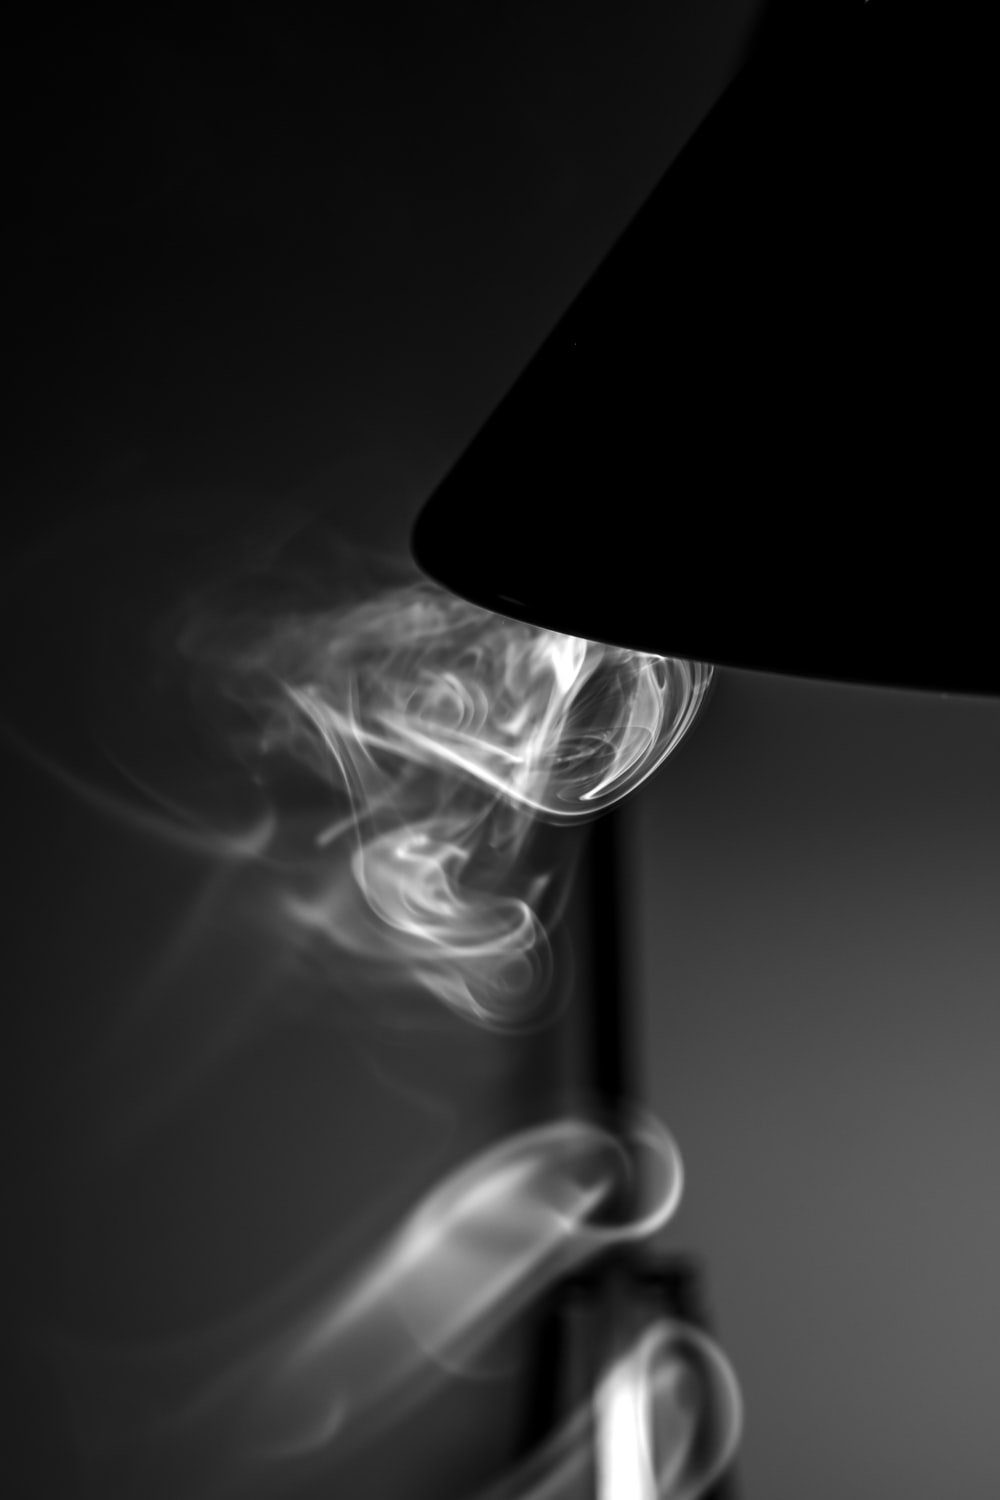 Smoke Rings Pictures Image